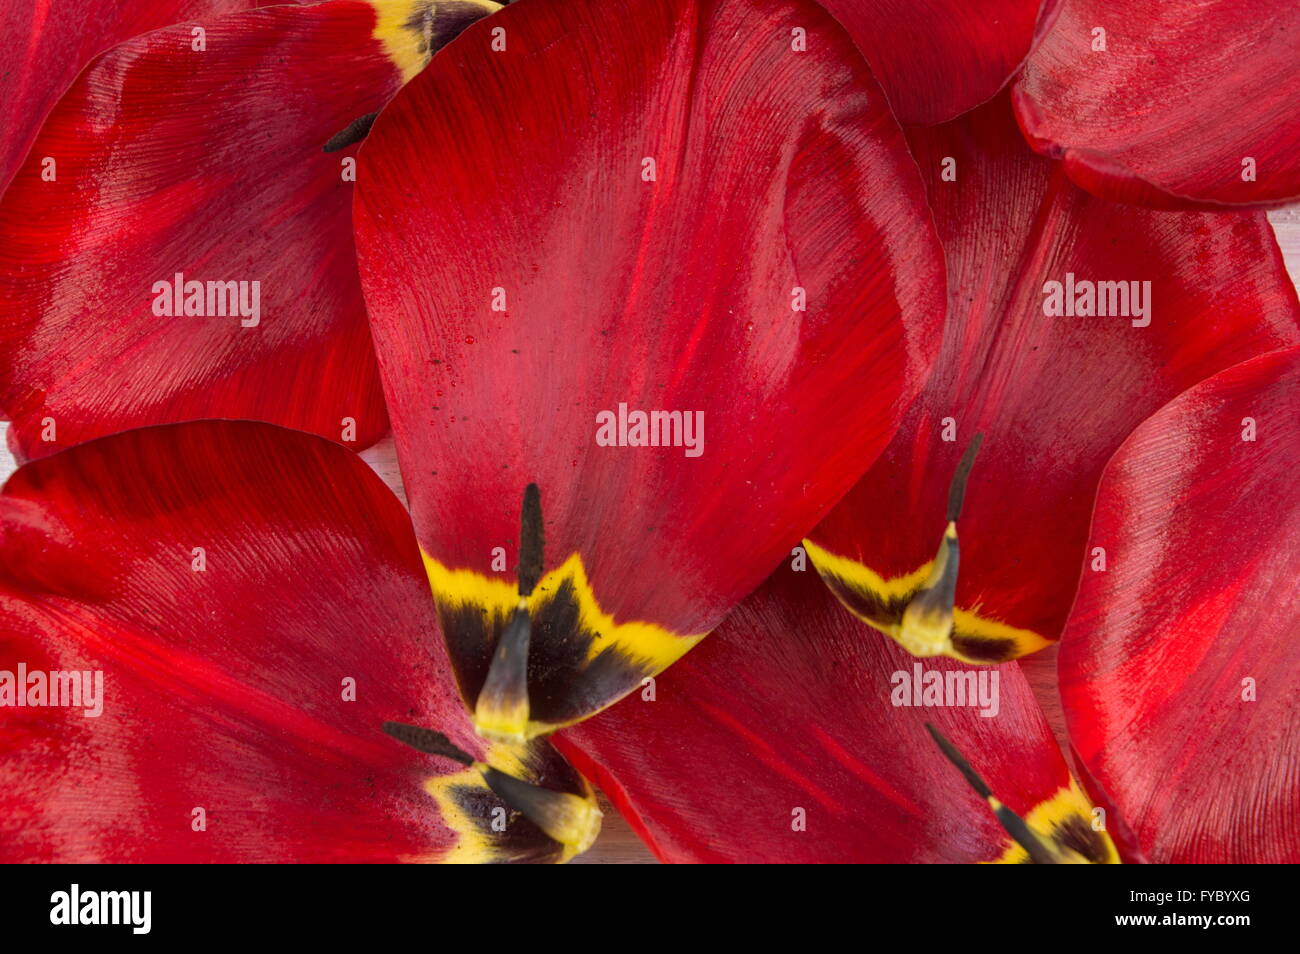 Red tulip petals close up background Stock Photo